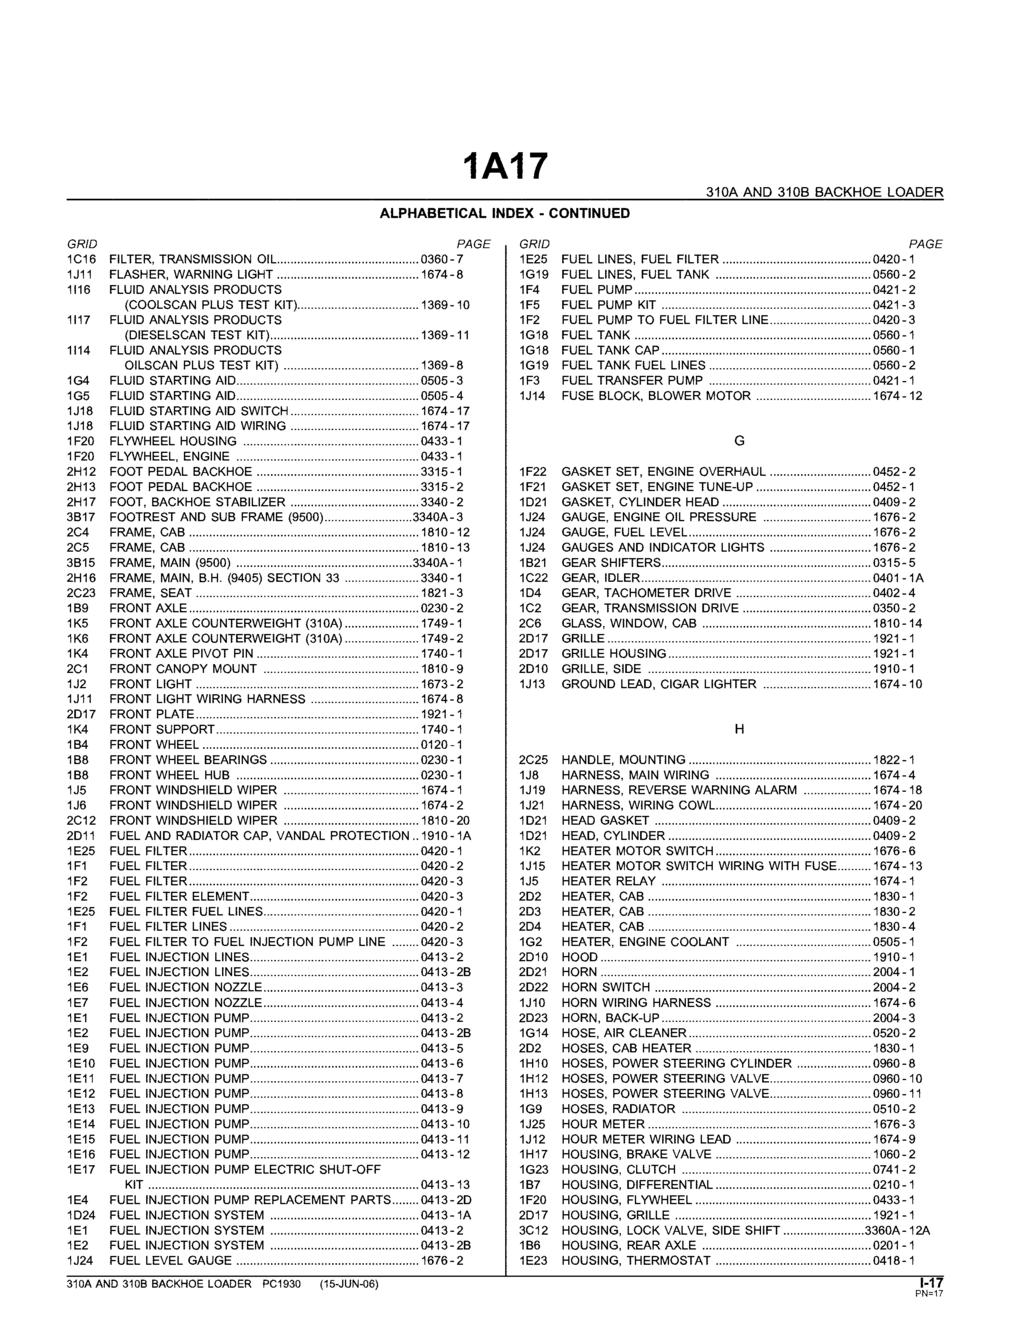 1A17 ALPHABETICAL INDEX - CONTINUED GRID 1C16 1J11 1116 PAGE FILTER, TRANSMISSION OIL.... 0360-7 FLASHER, WARNING LIGHT... 1674-8 FLUID ANALYSIS PRODUCTS (COOLSCAN PLUS TEST KIT).